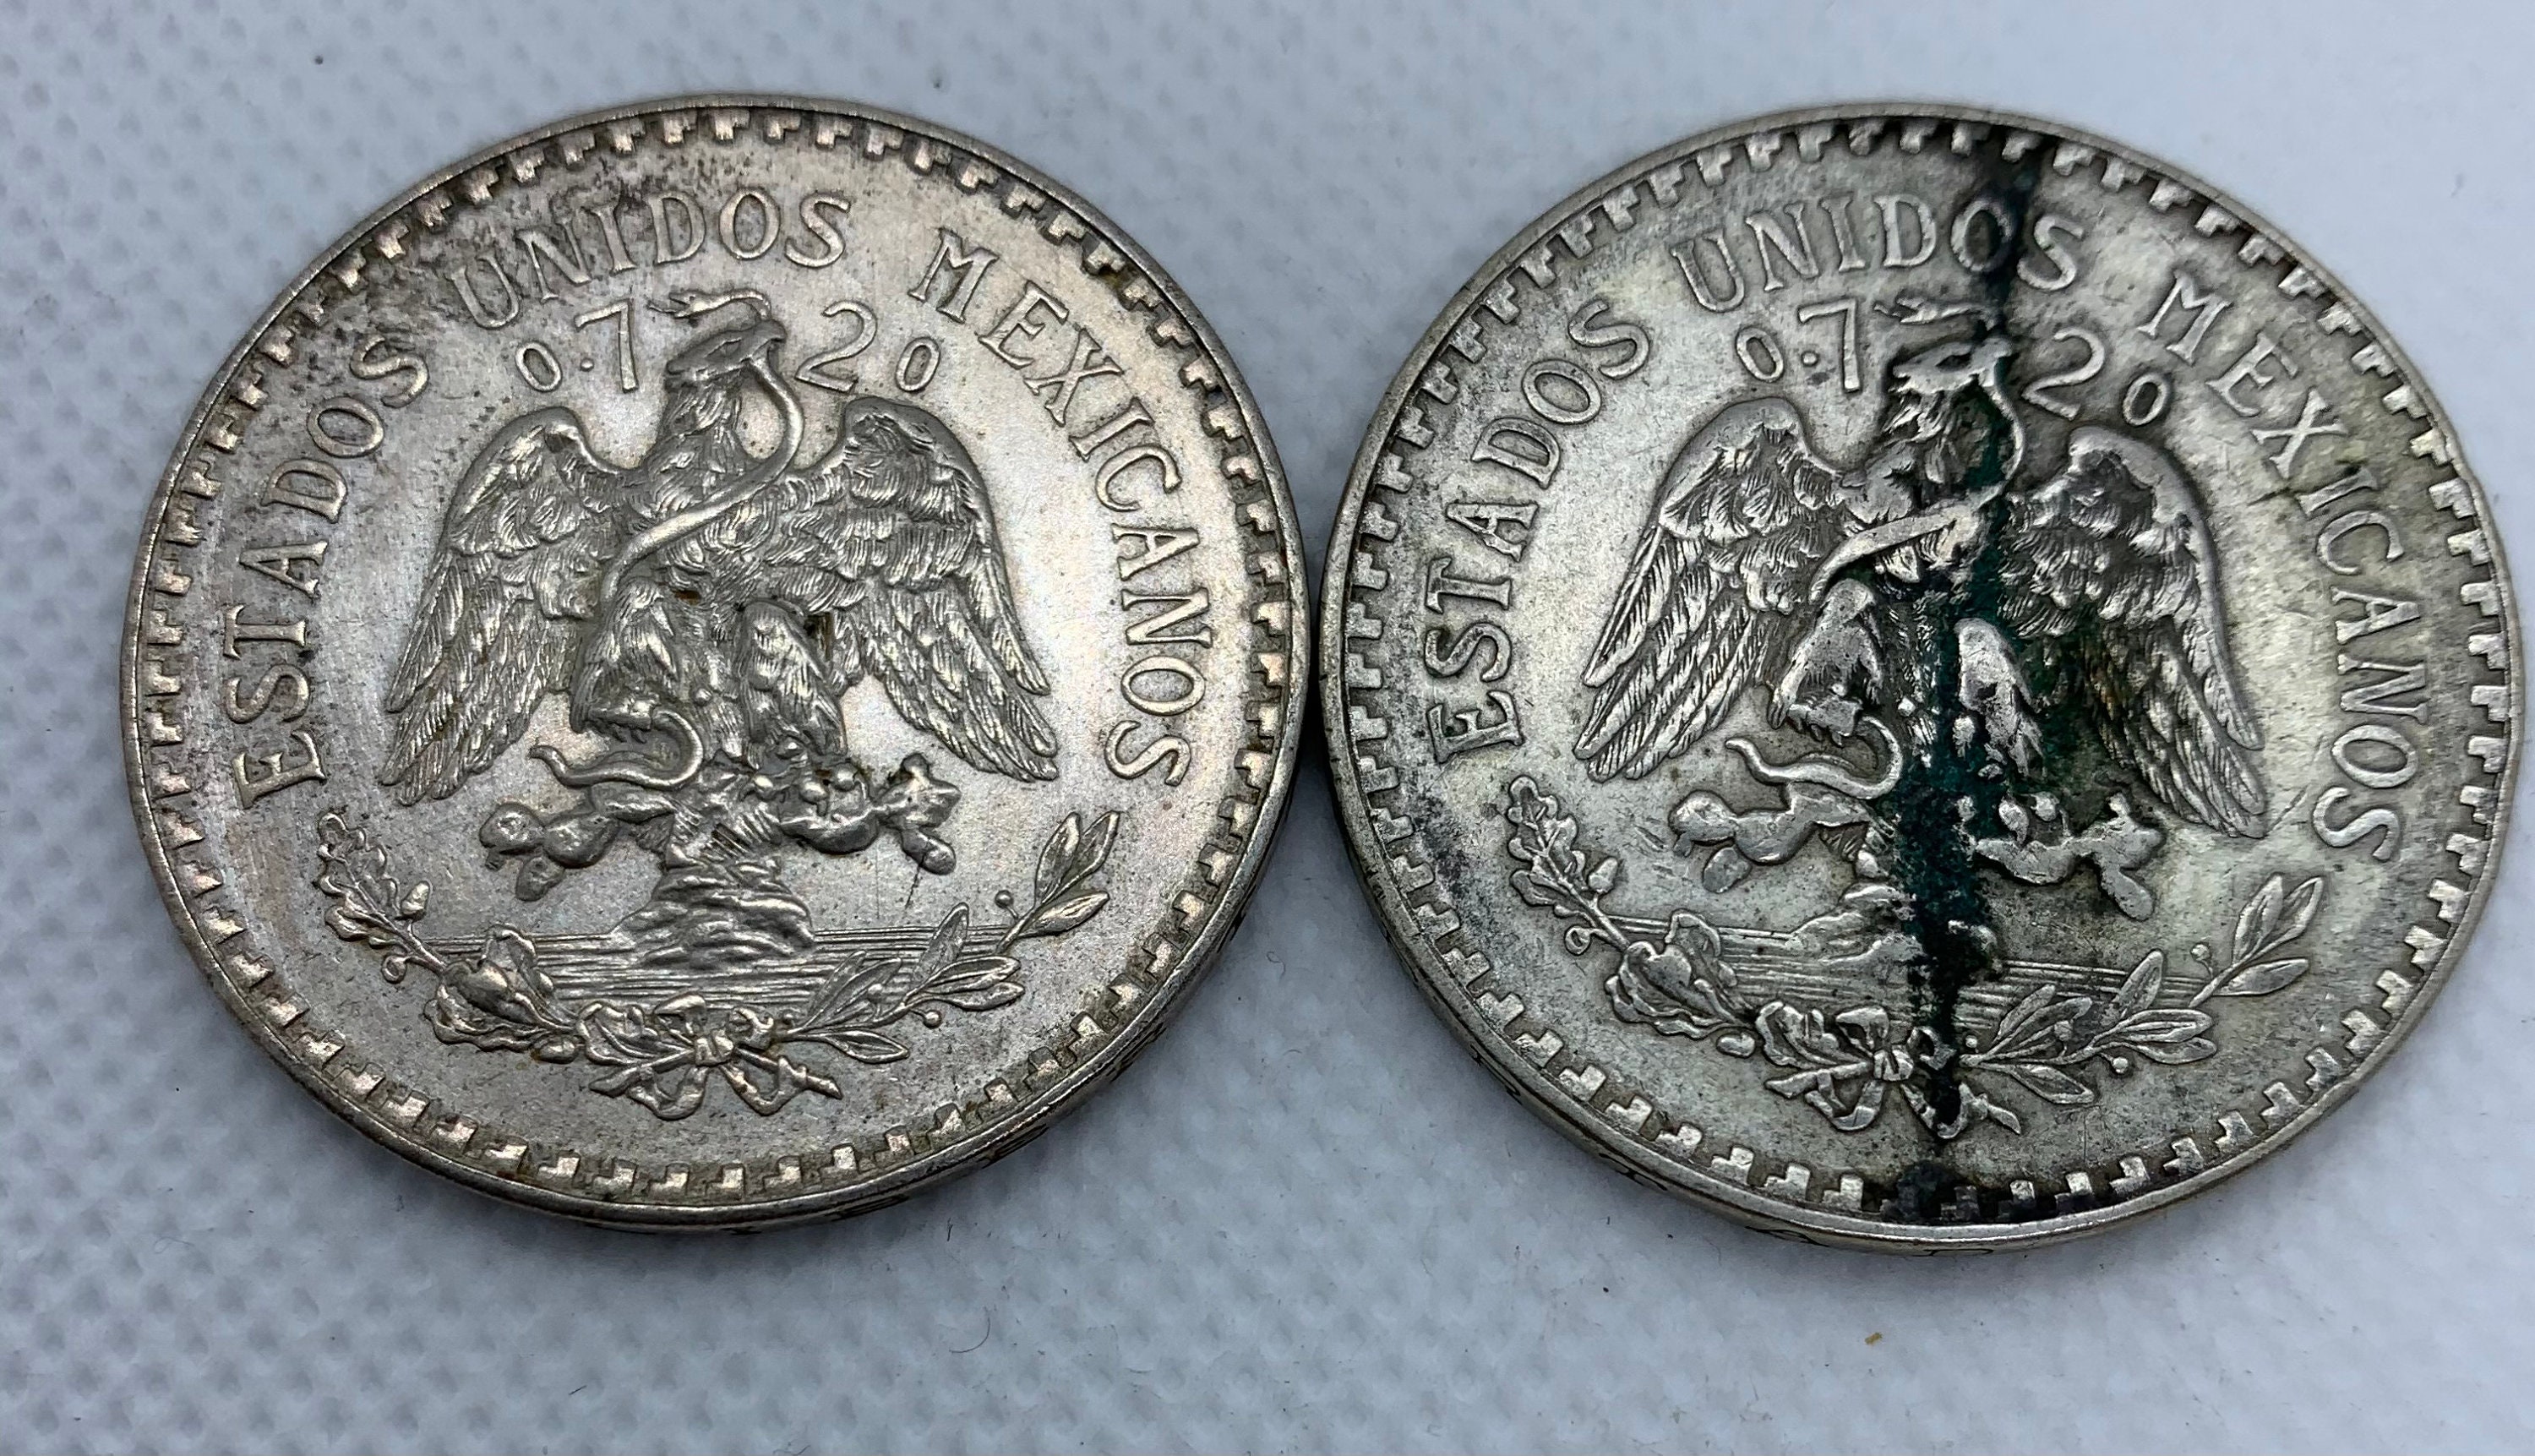 2 Large Mexican silver pesos. Cap and rays 1933 and 1935 | Etsy